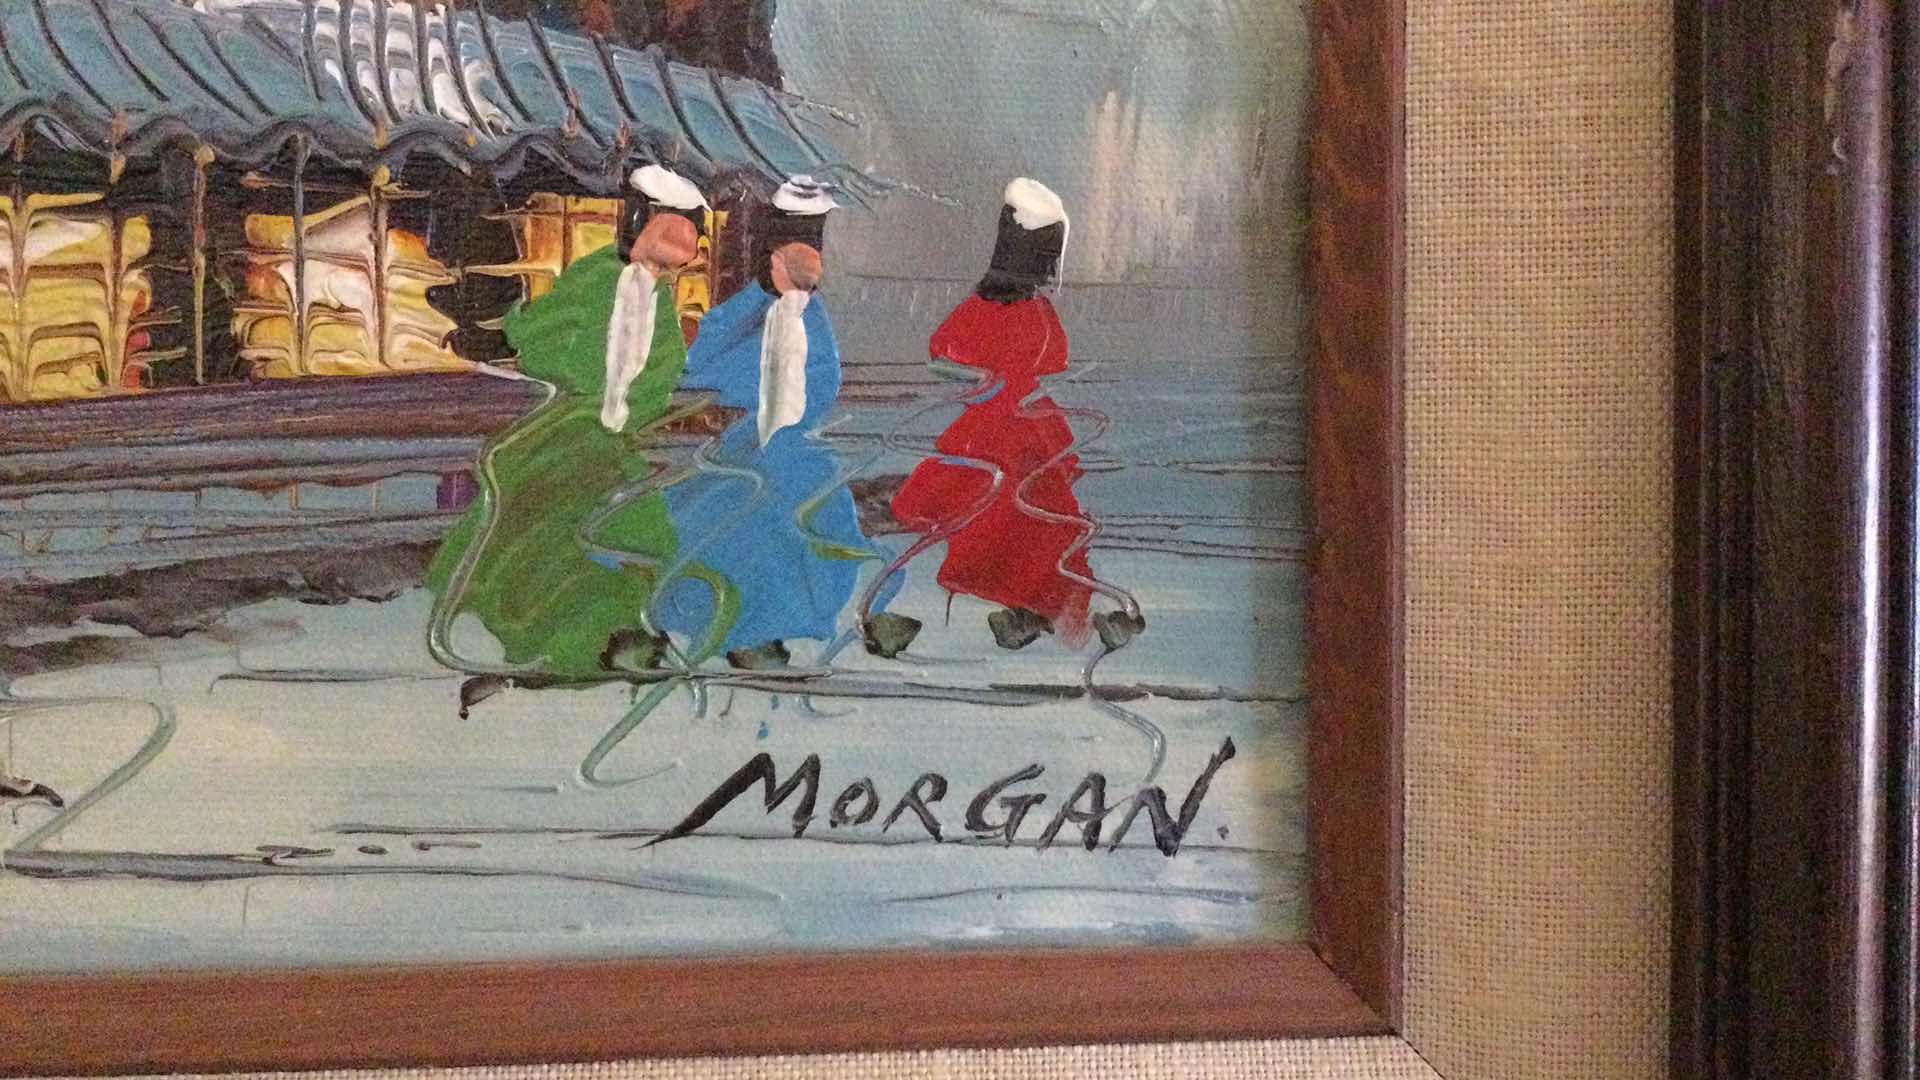 Photo 3 of FRAMED ARTIST SIGNED “MORGAN” PAINTING ON CANVAS 18” X 16”